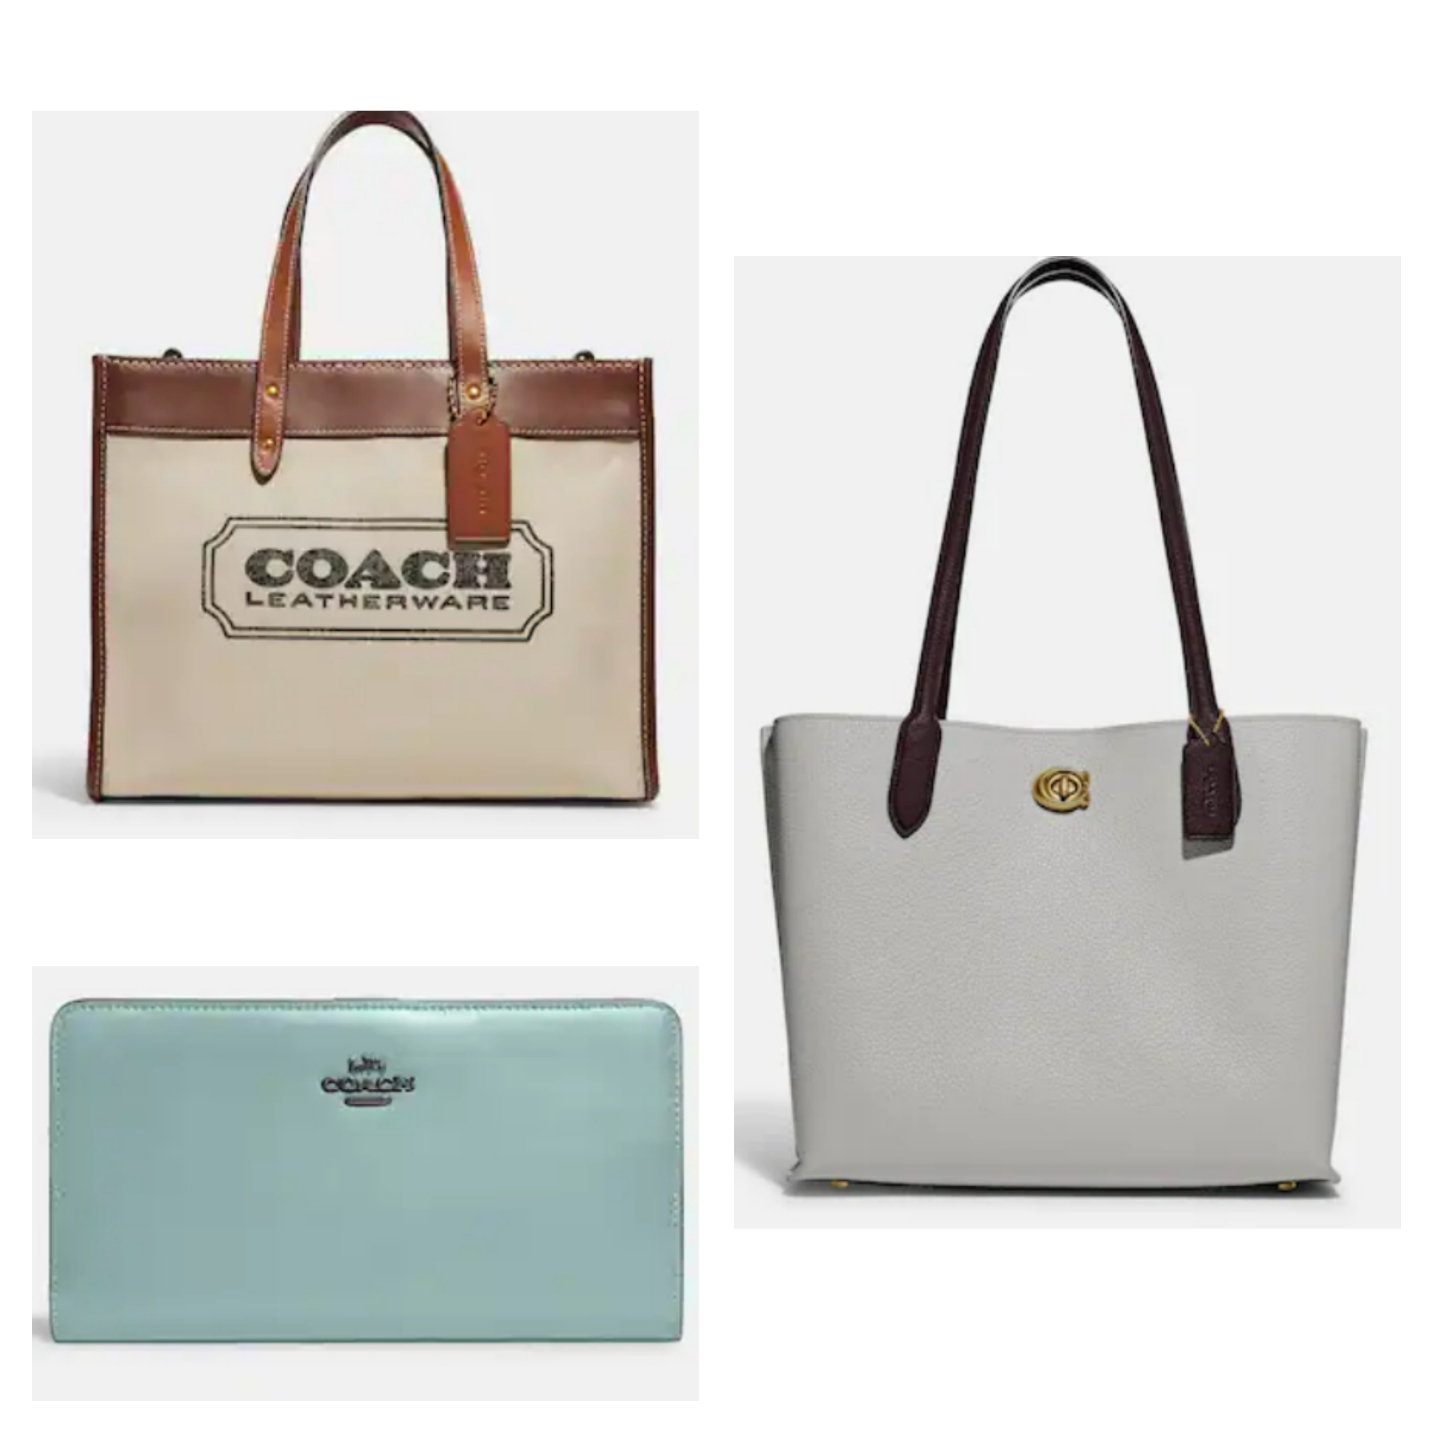 Best Coach Purse for sale in Minot, North Dakota for 2023